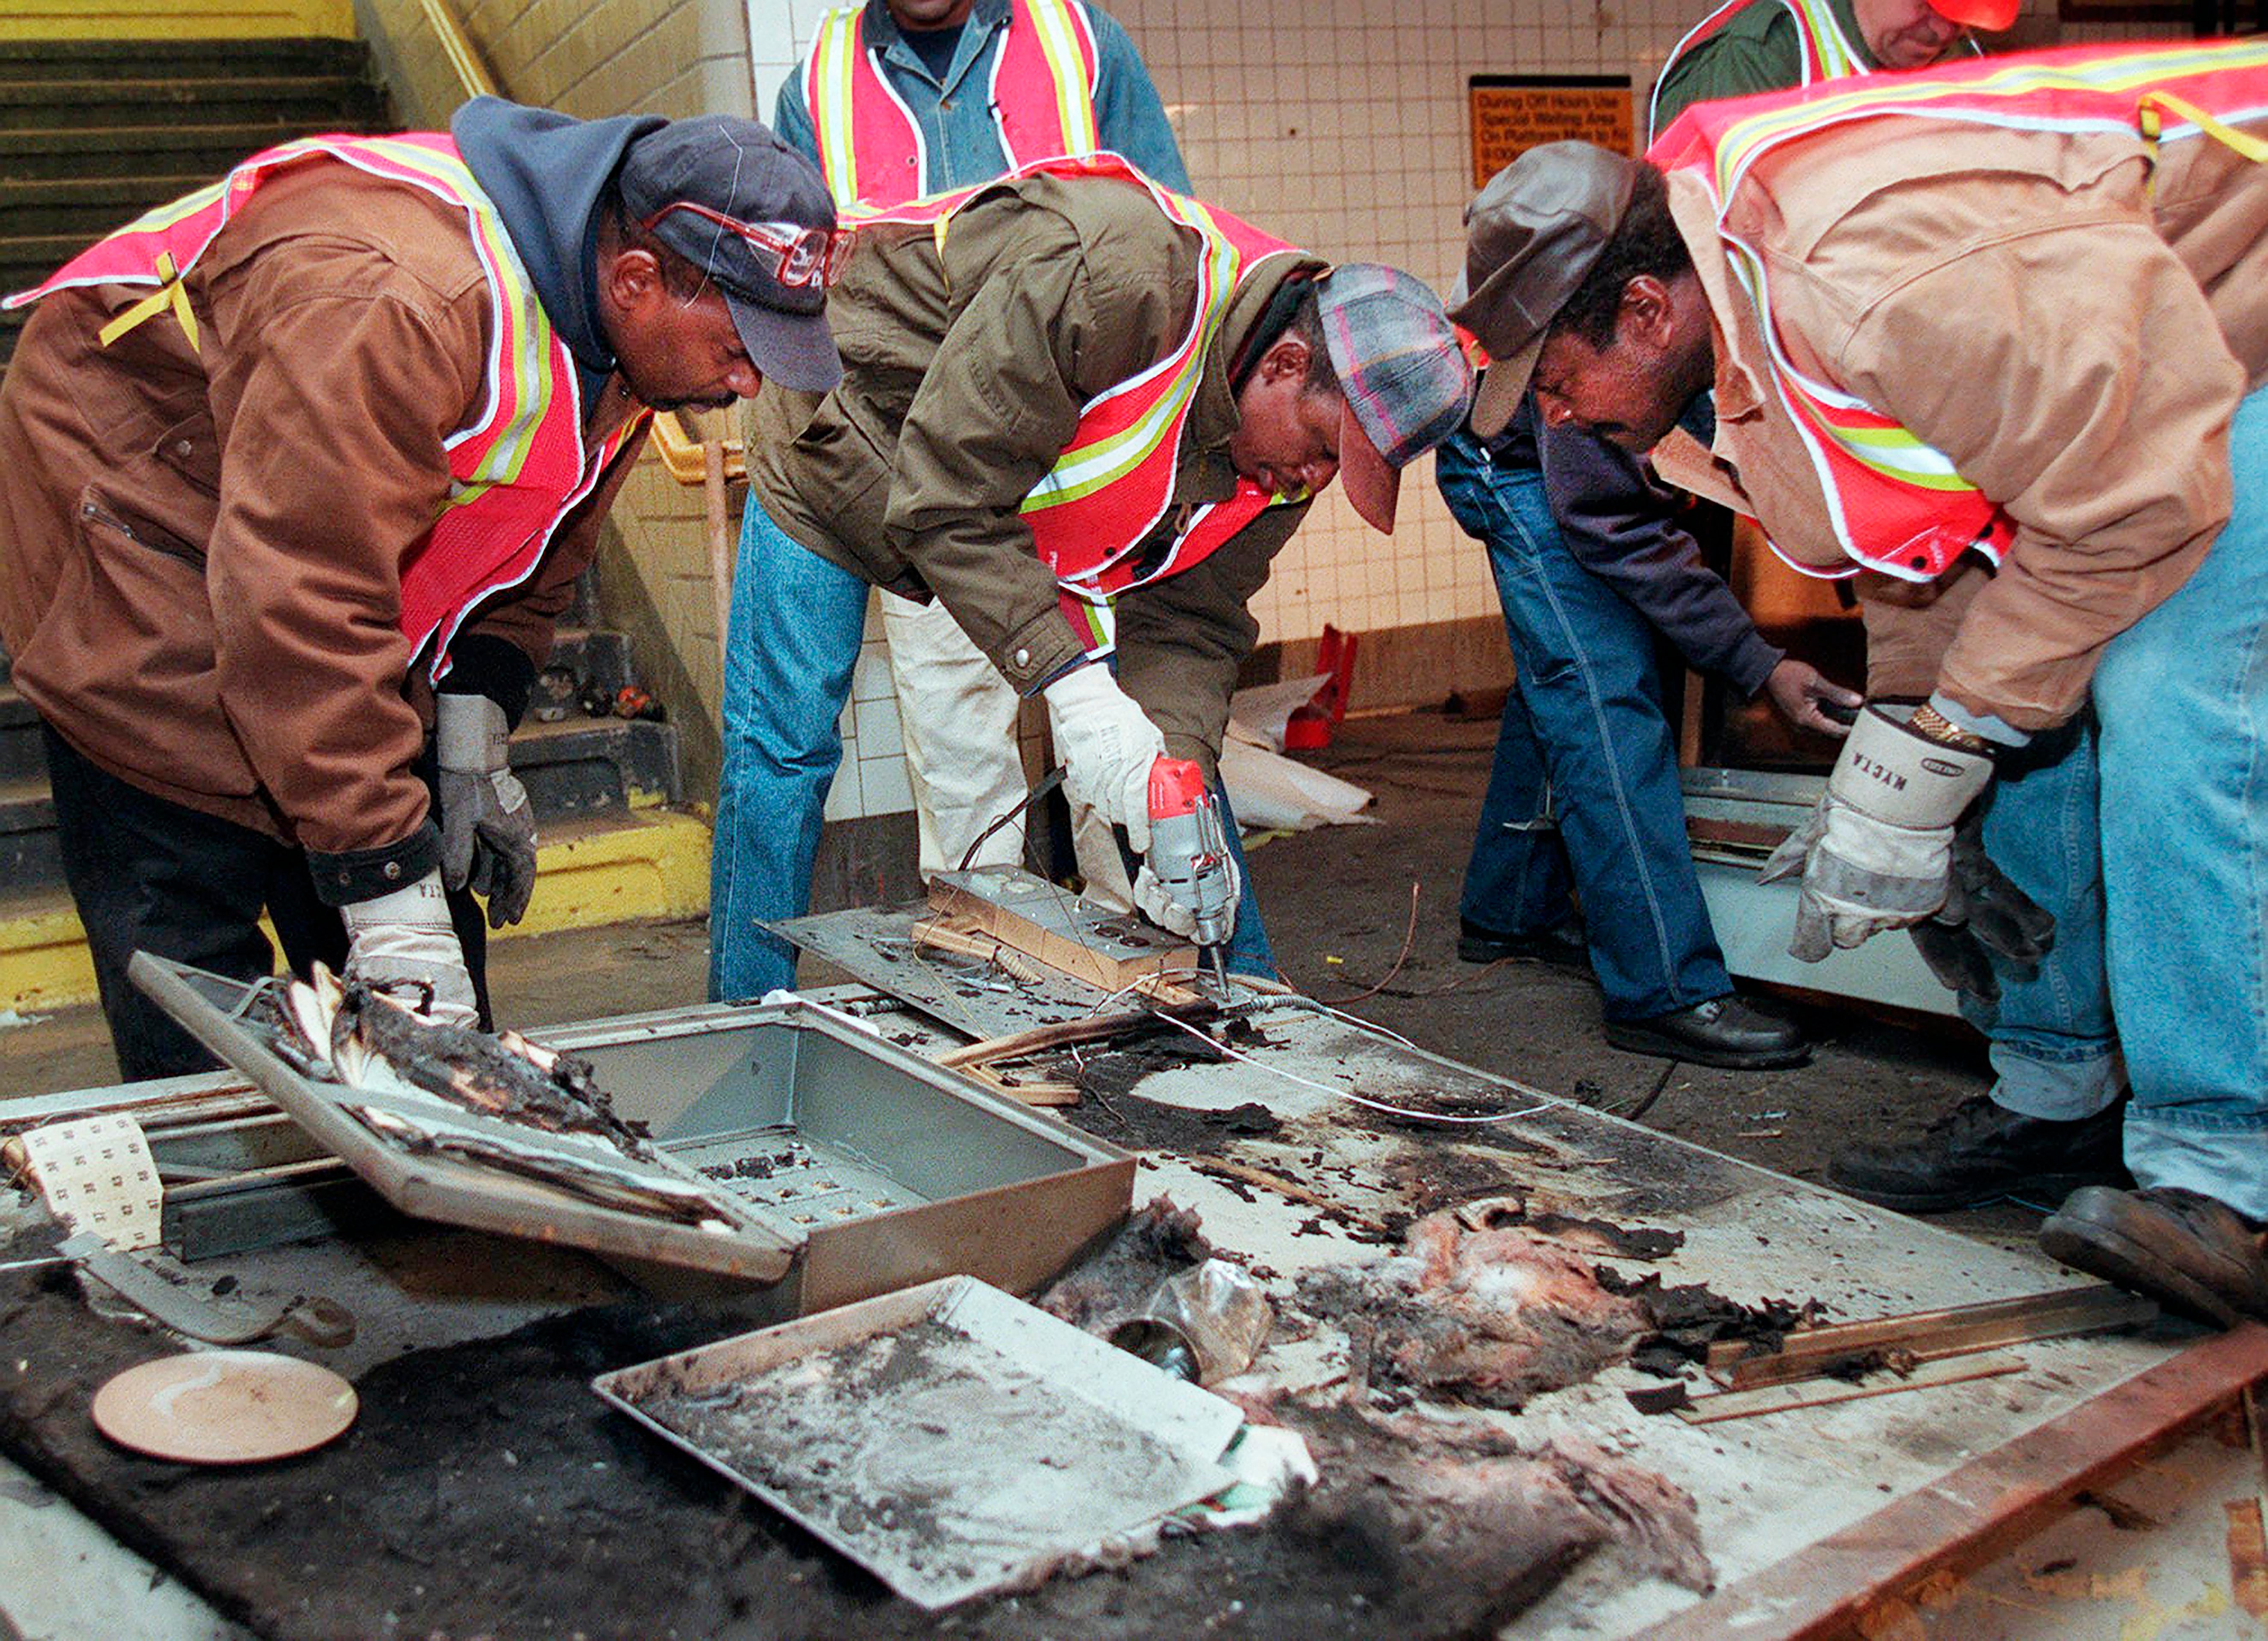 Transit workers dismantle the charred inner wall of a token booth at the Kingston Avenue and Fulton Street subway station in the Bedford-Stuyvesant section of Brooklyn, November 26, 1995, after attackers sprayed a flammable liquid into the token booth and set it on fire